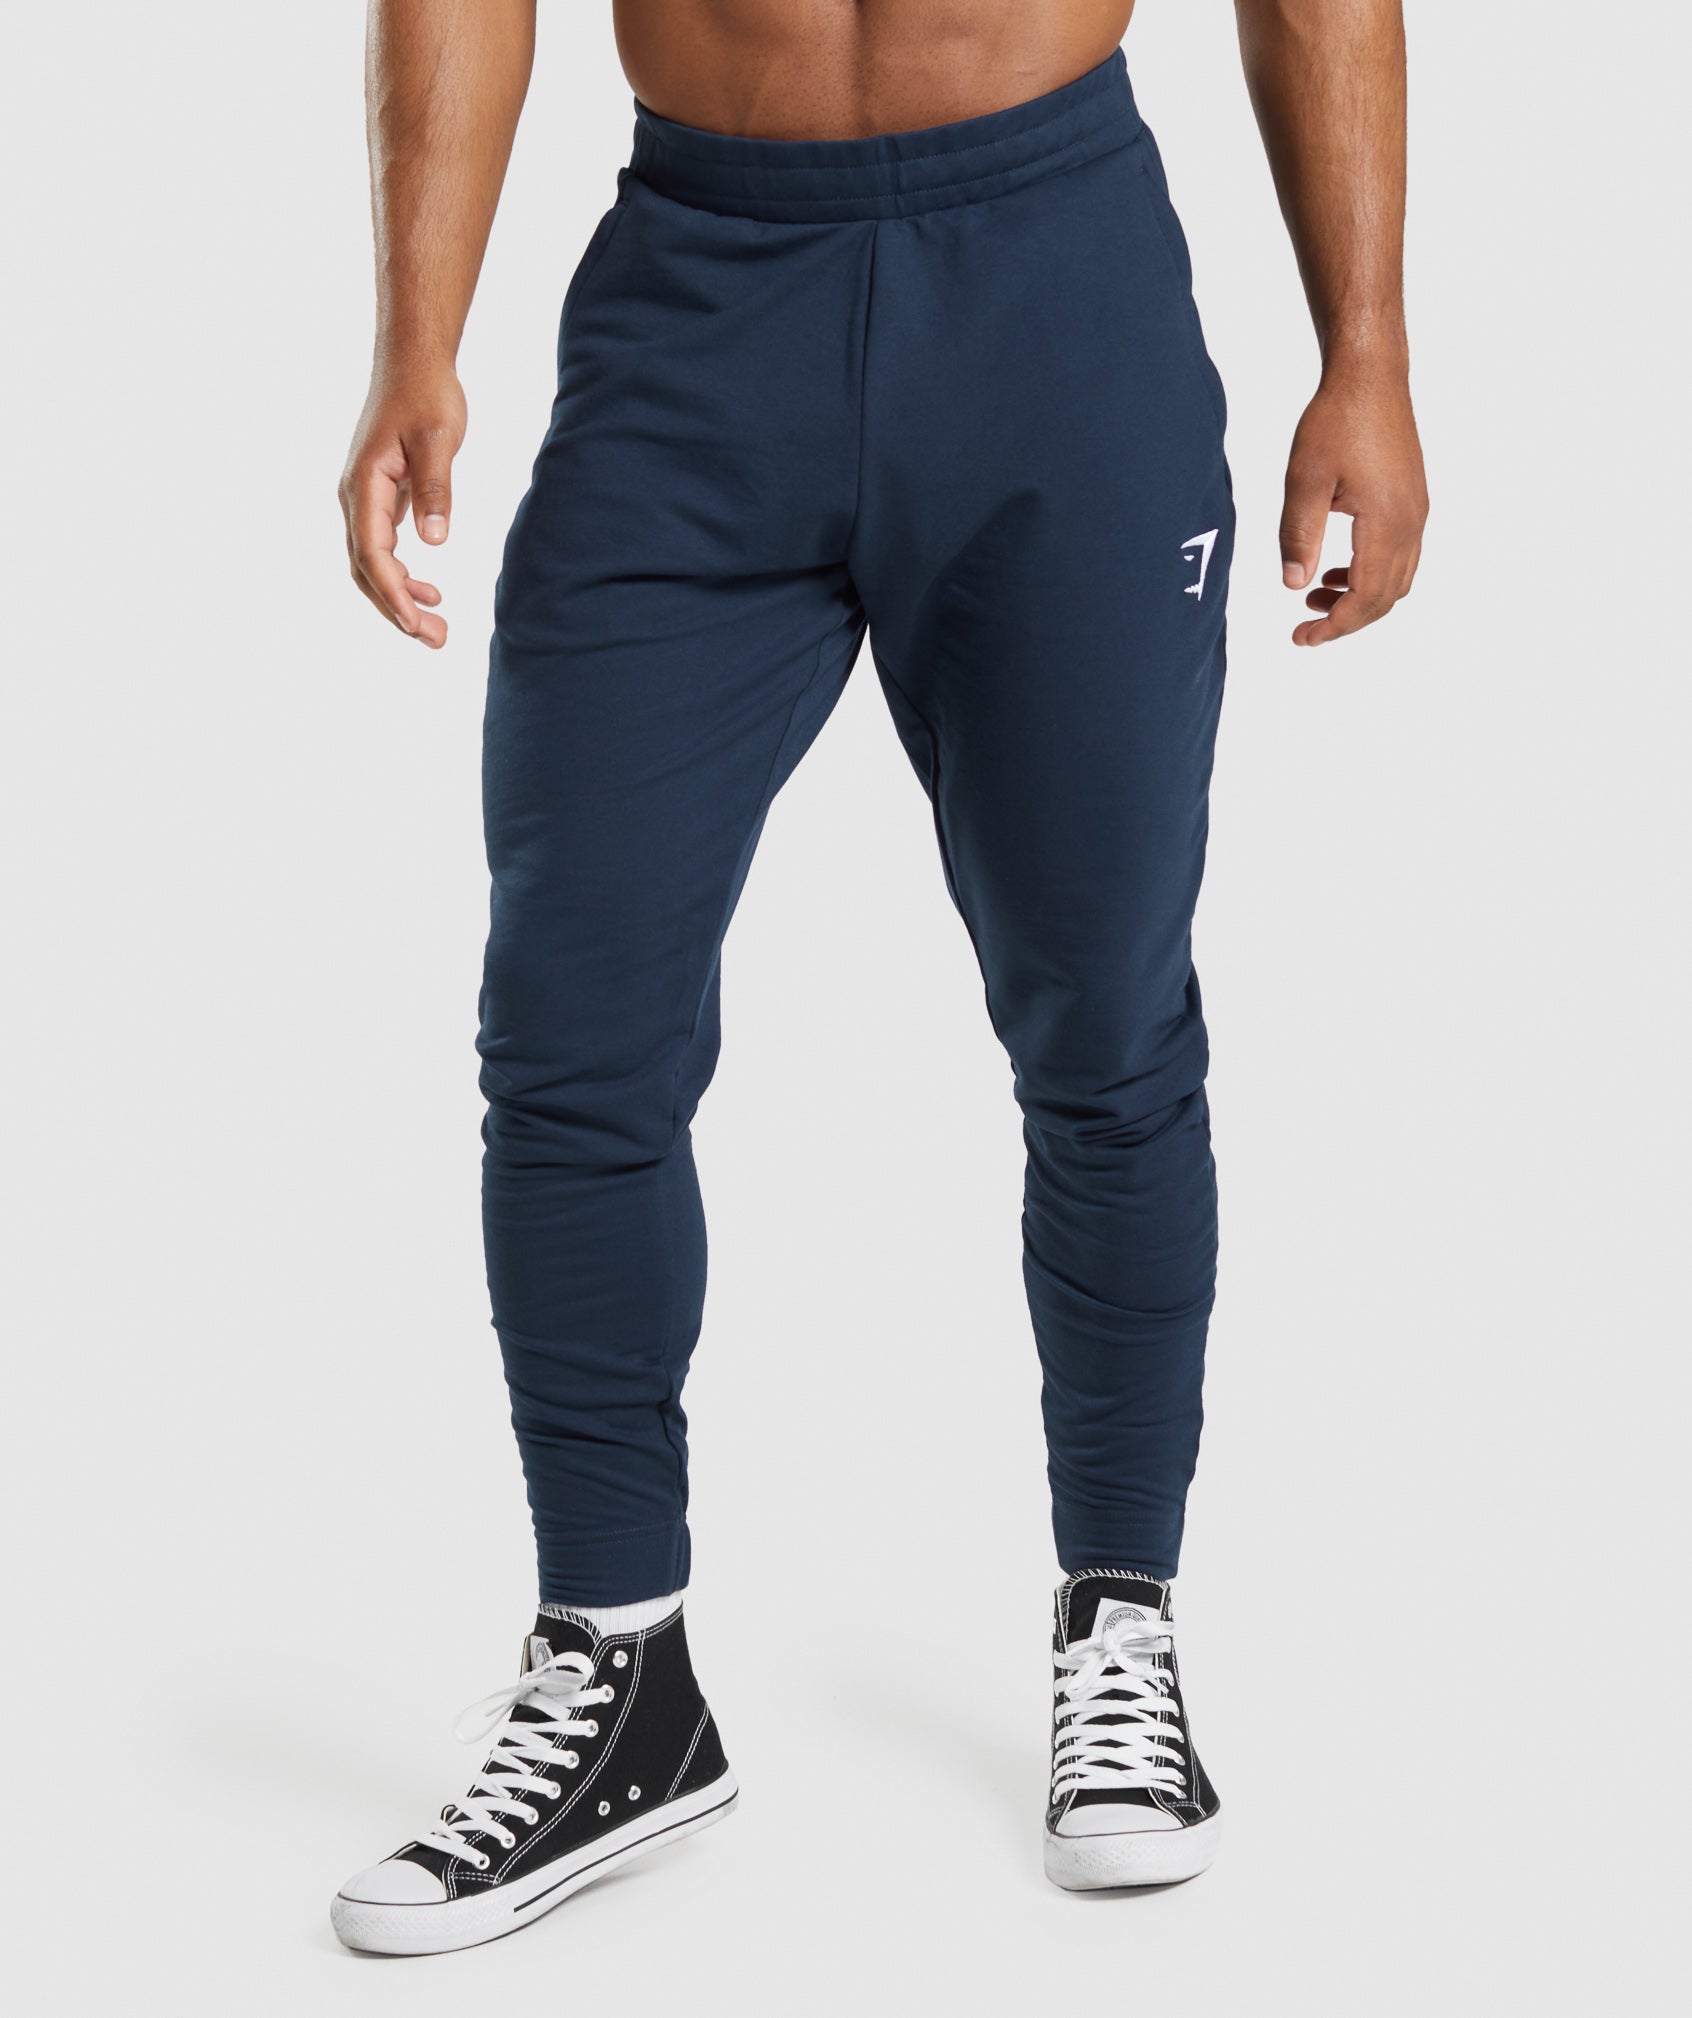 Critical Pant in Navy - view 1